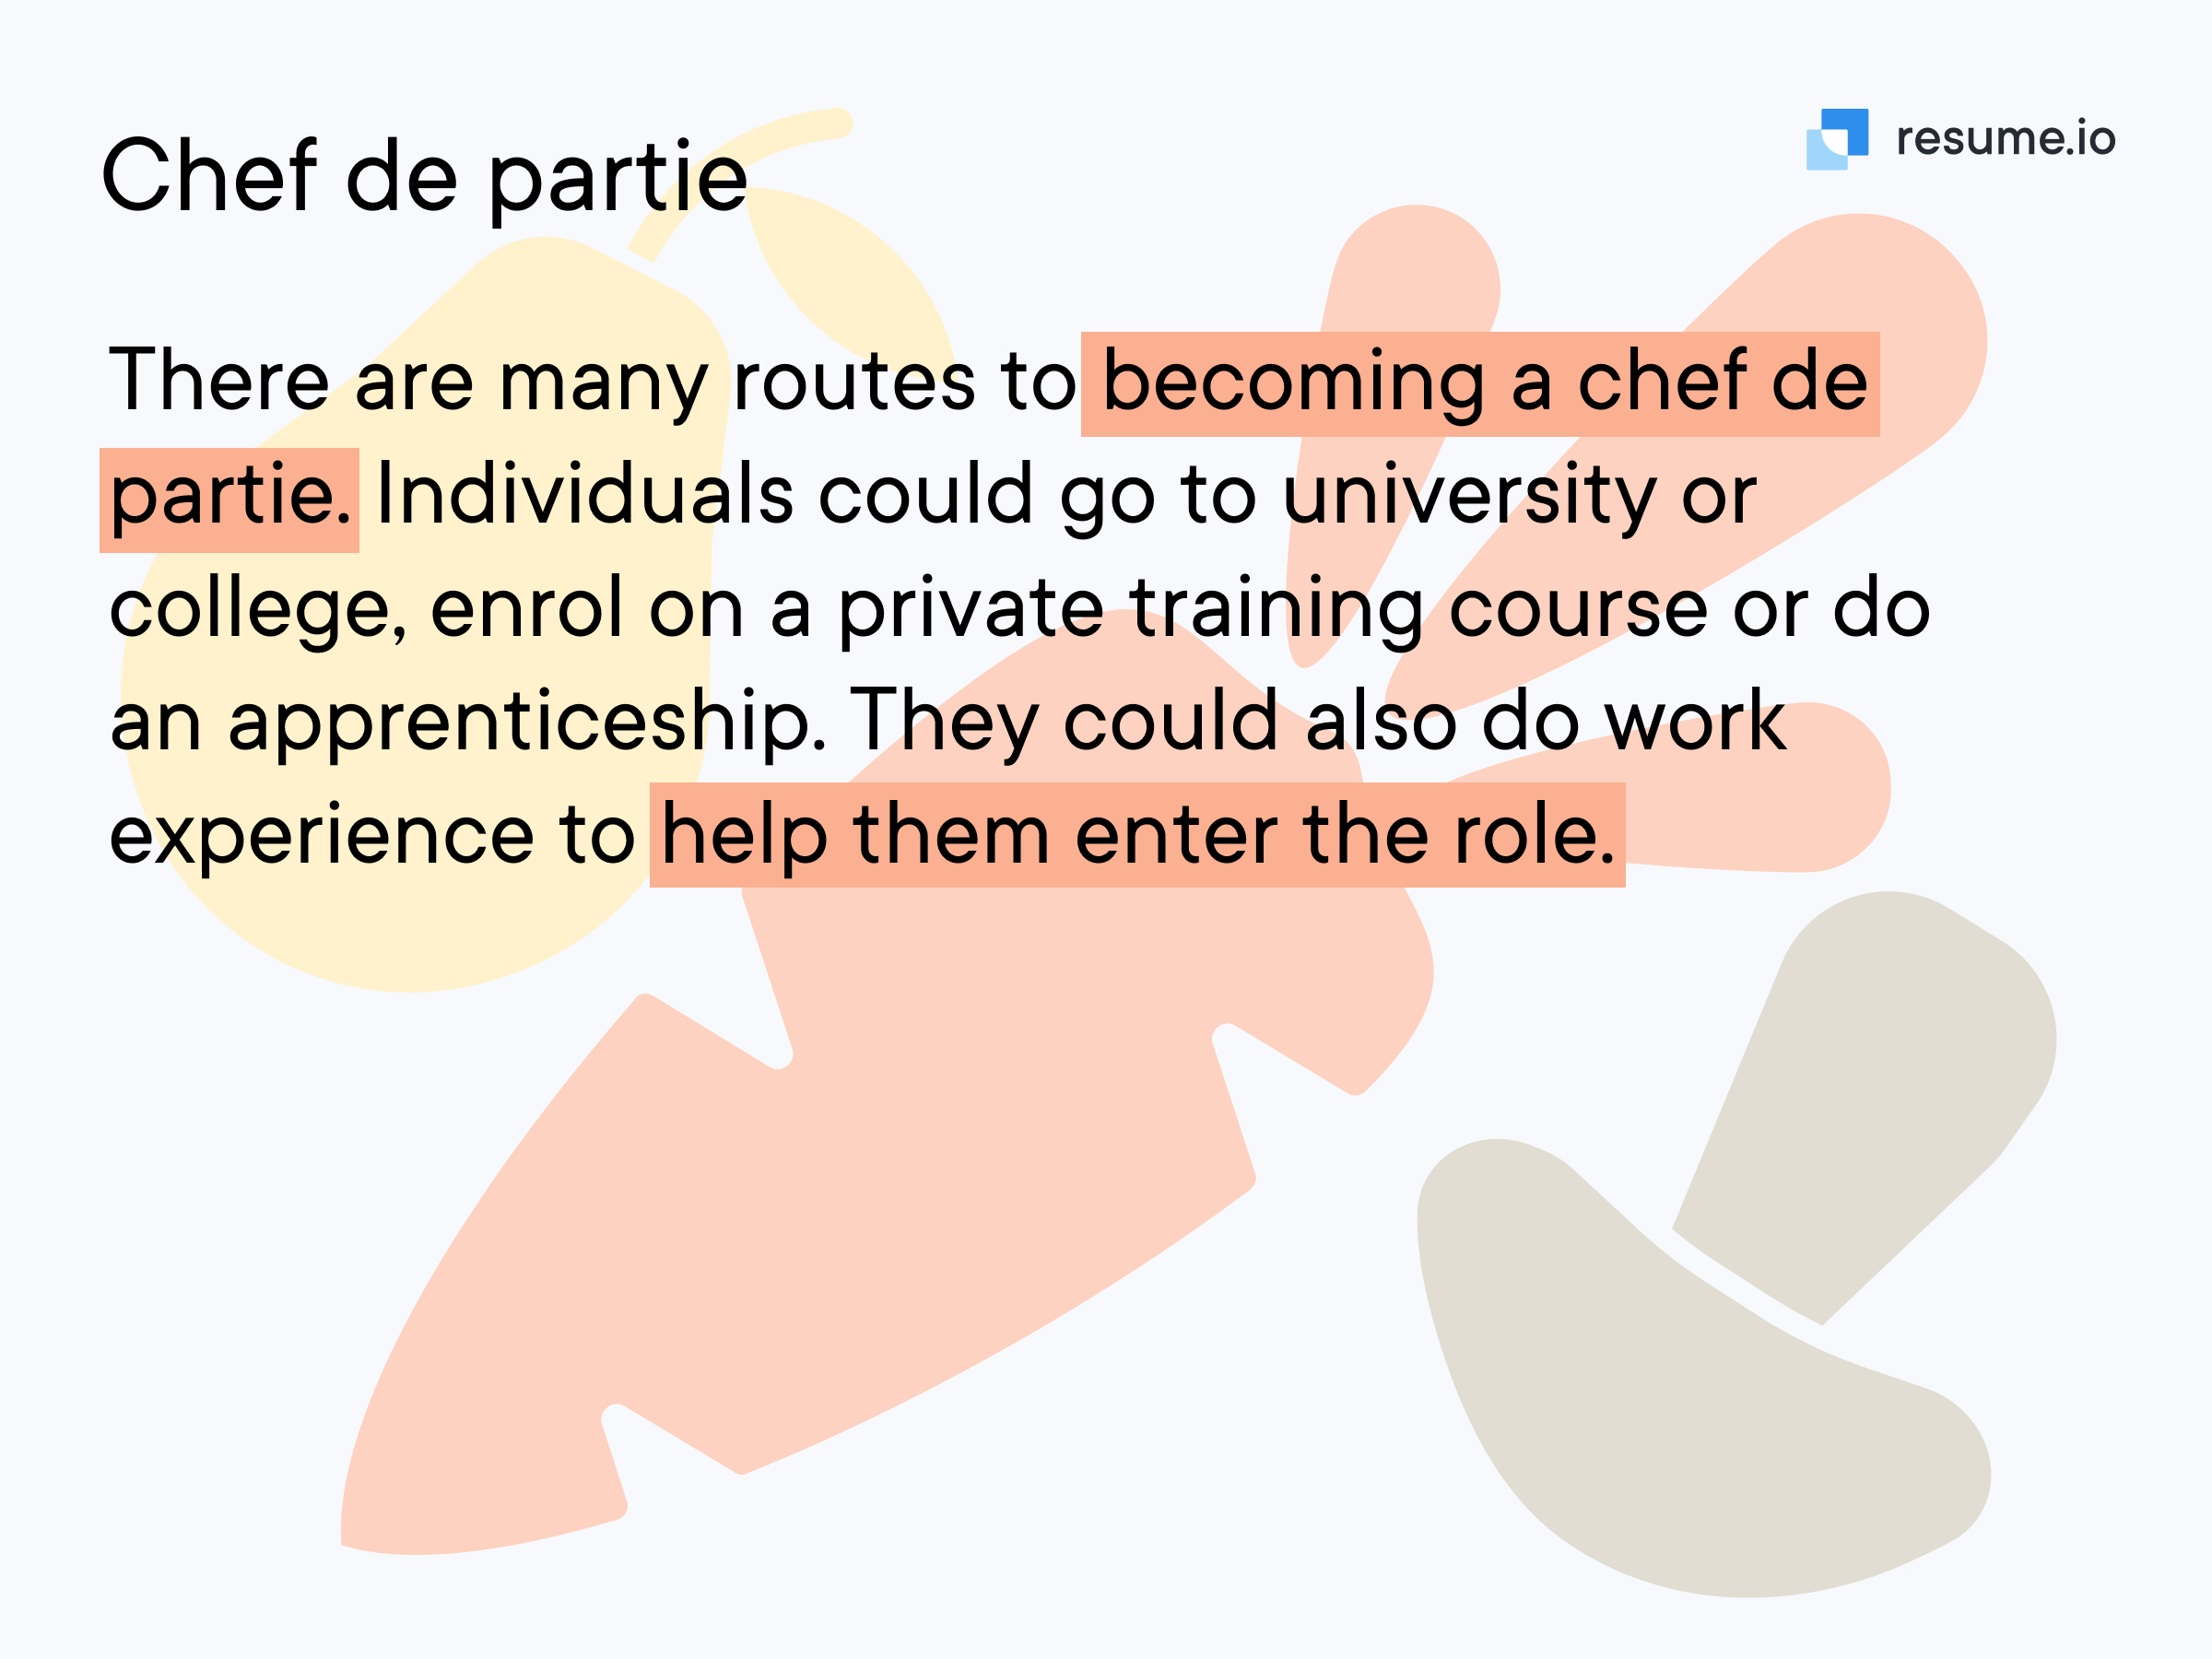 There are many routes to becoming a chef de partie